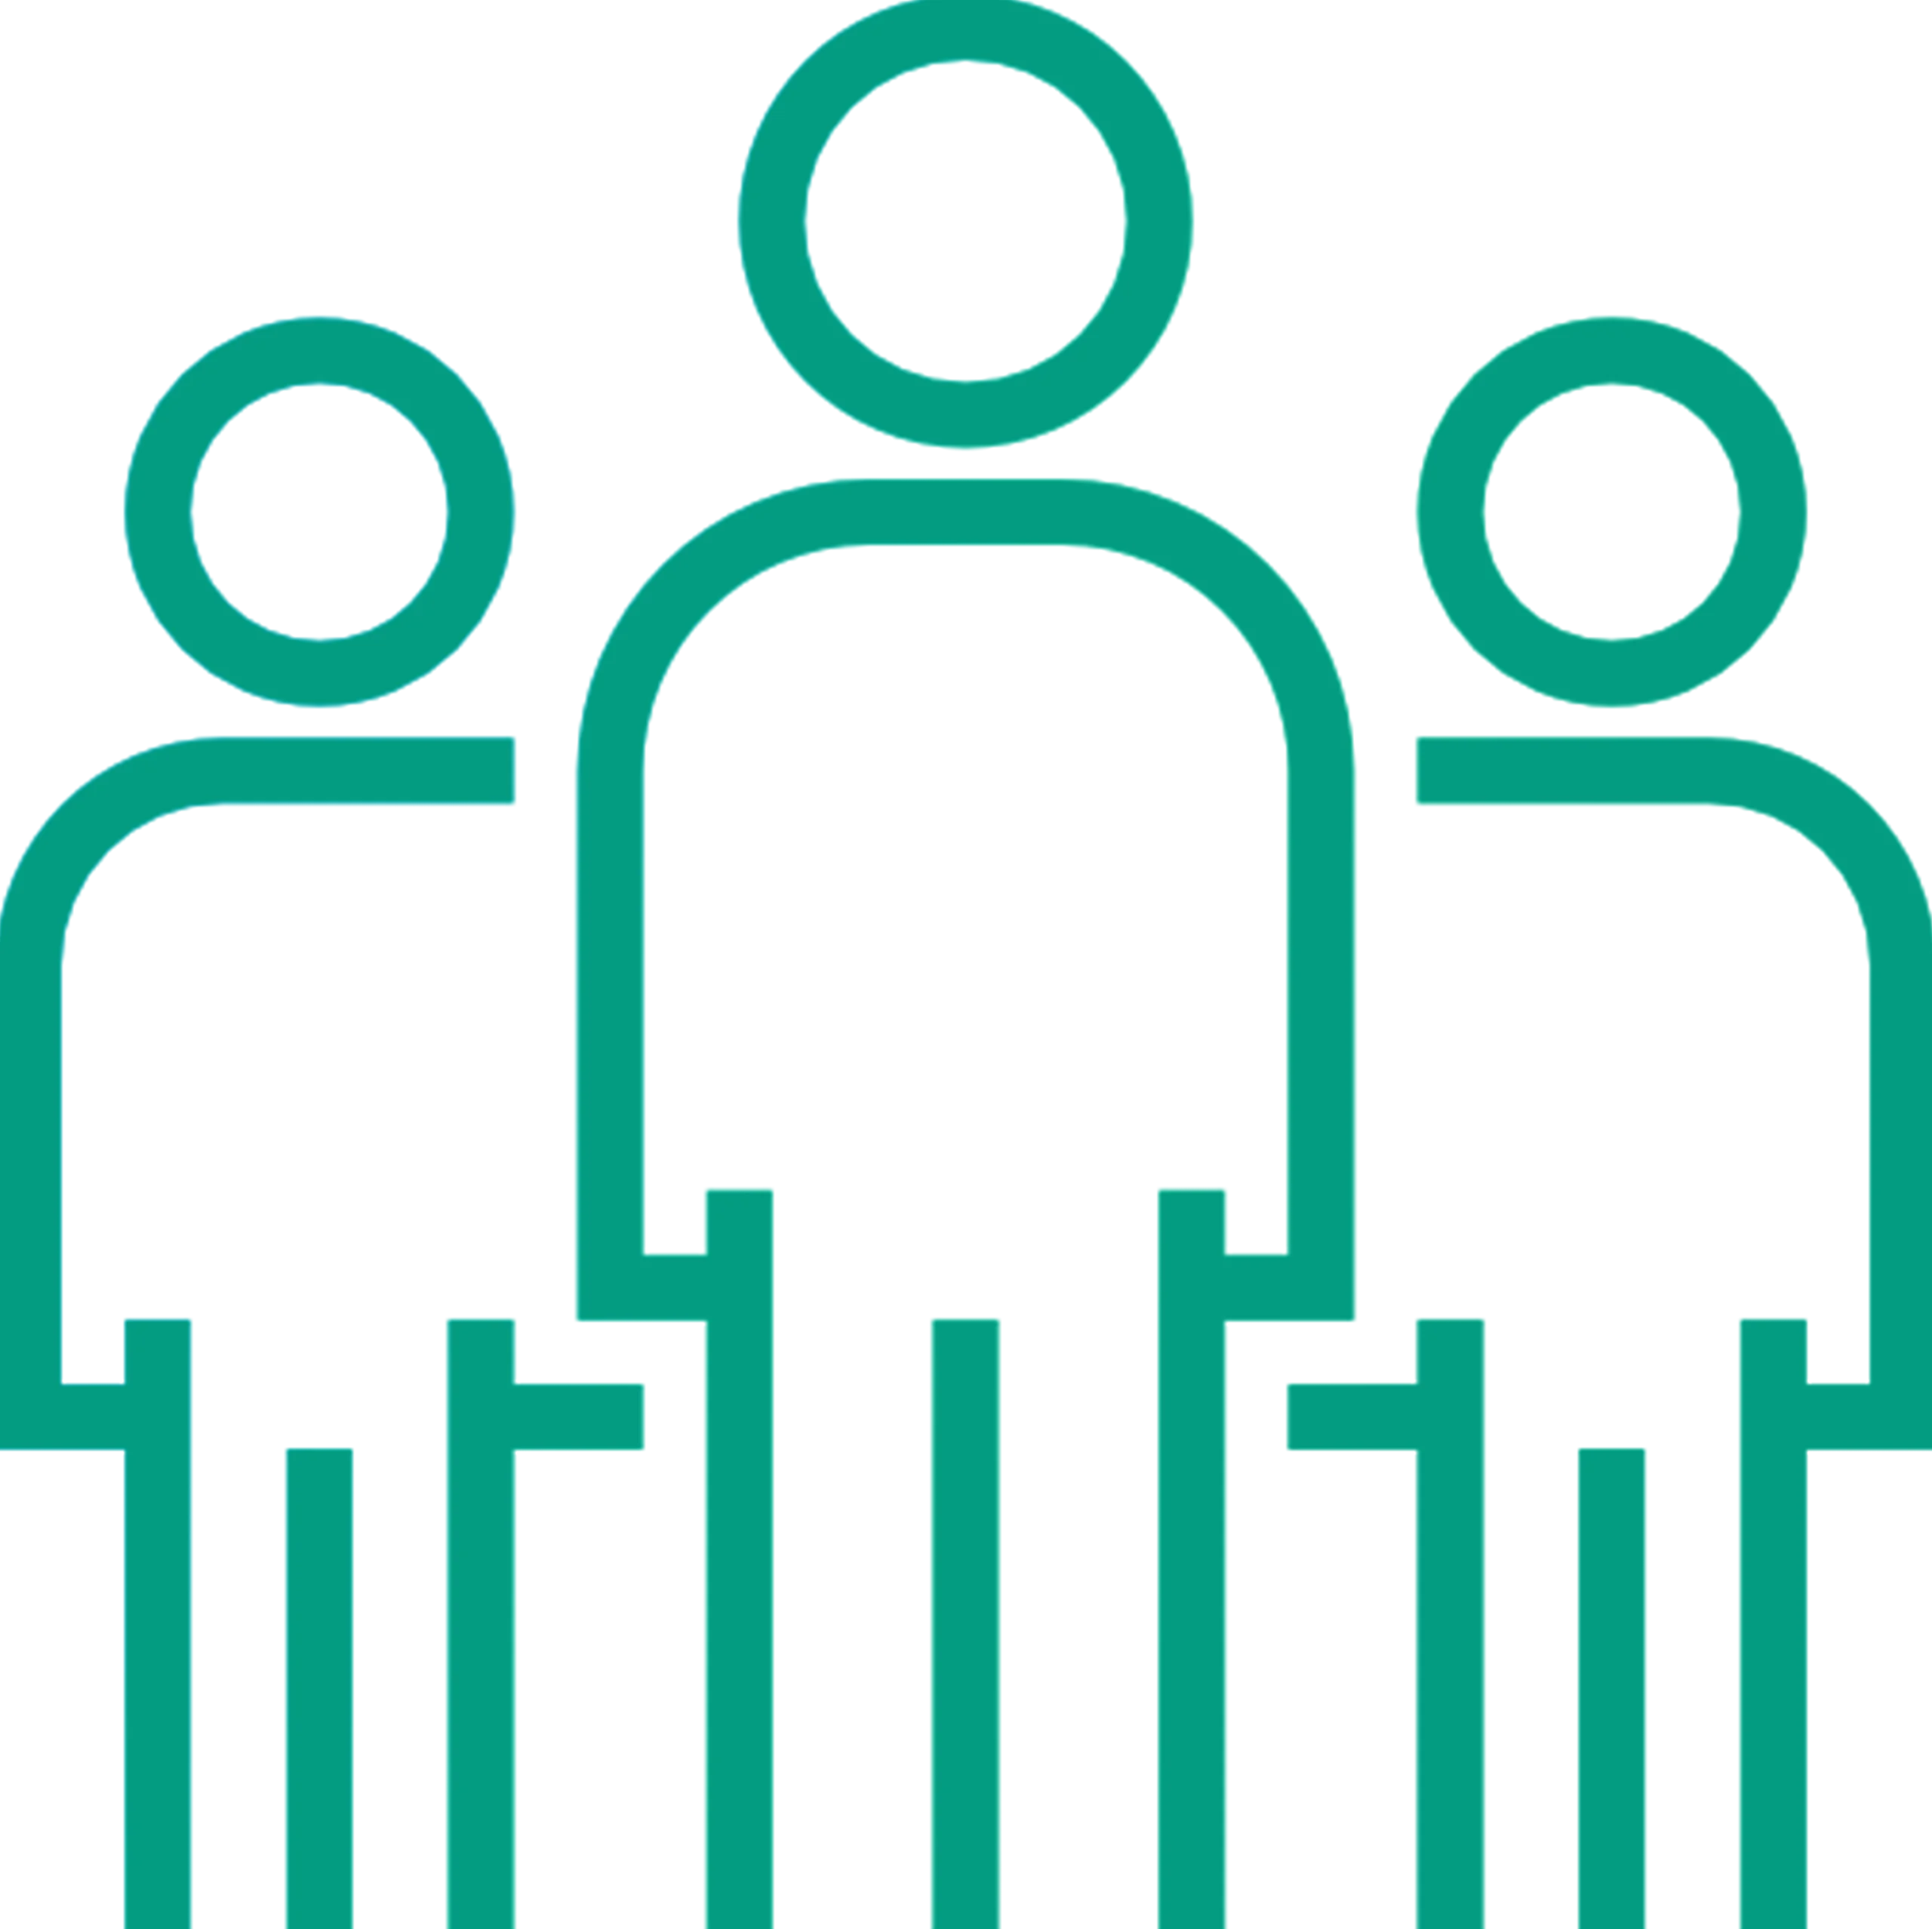 A green background featuring a minimalist line drawing of three individuals, representing a digital product development agency.